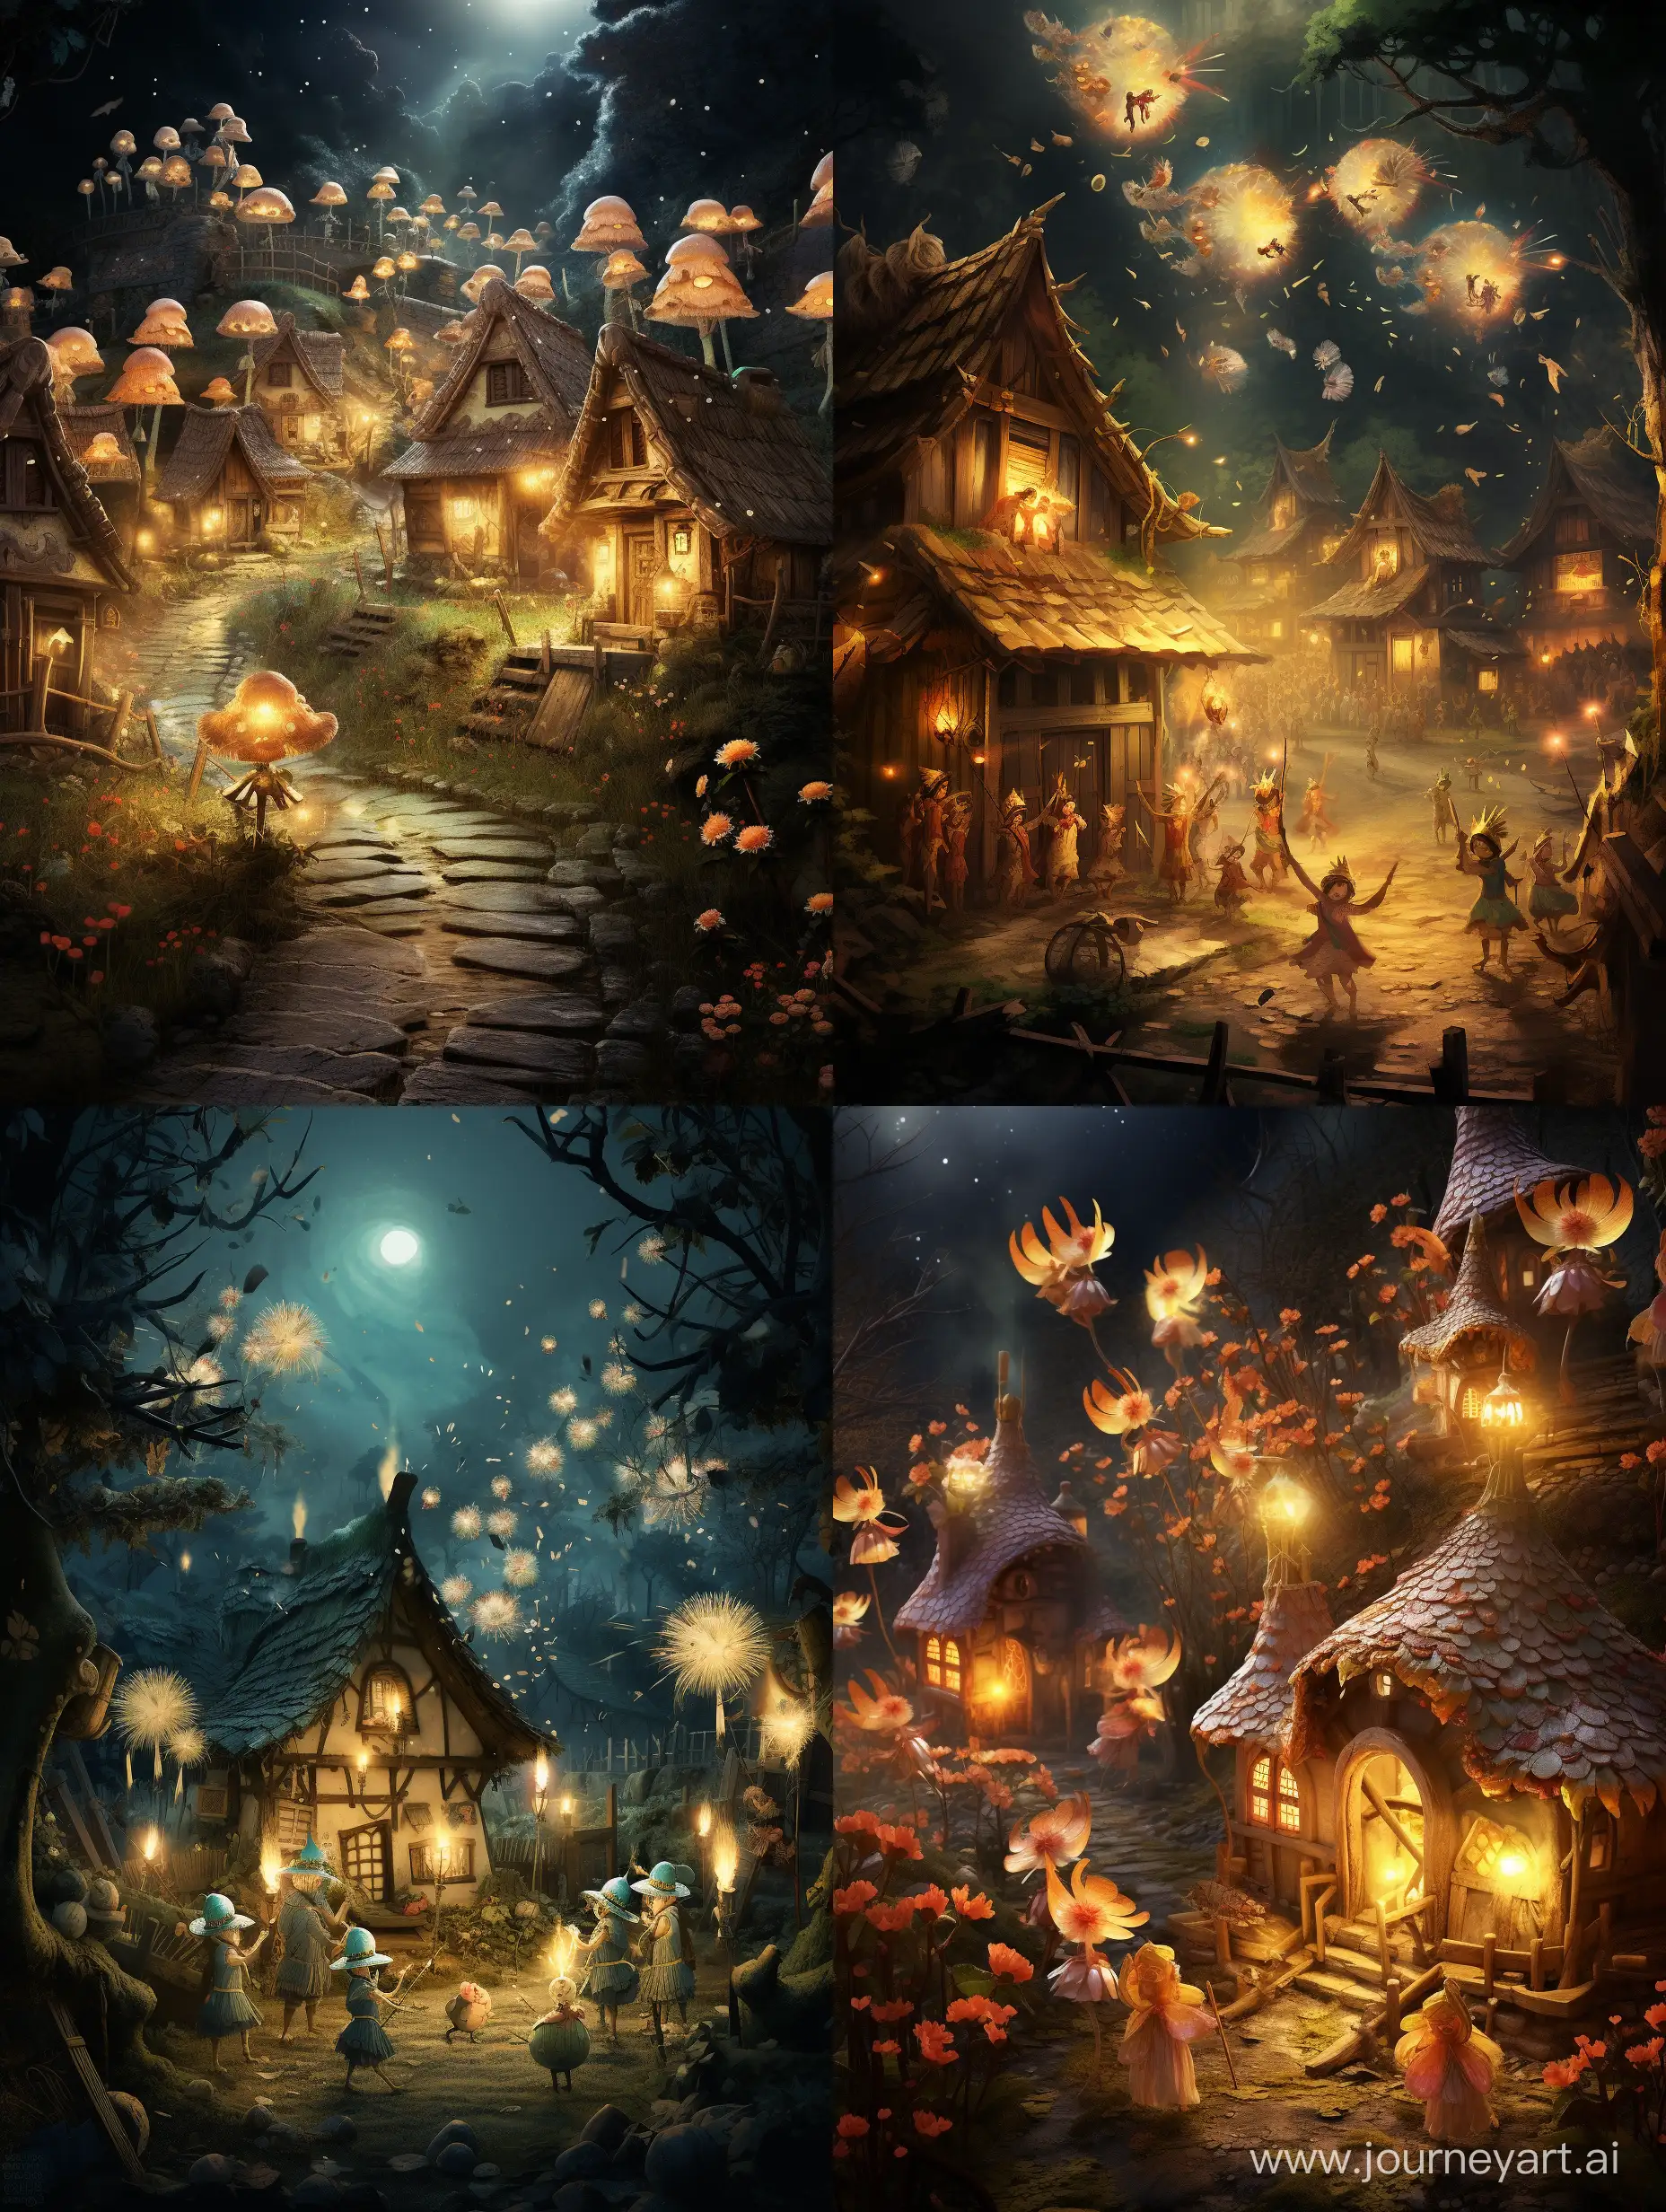 Enchanting-New-Year-Celebration-by-Fairy-Creatures-in-an-Ancient-Village